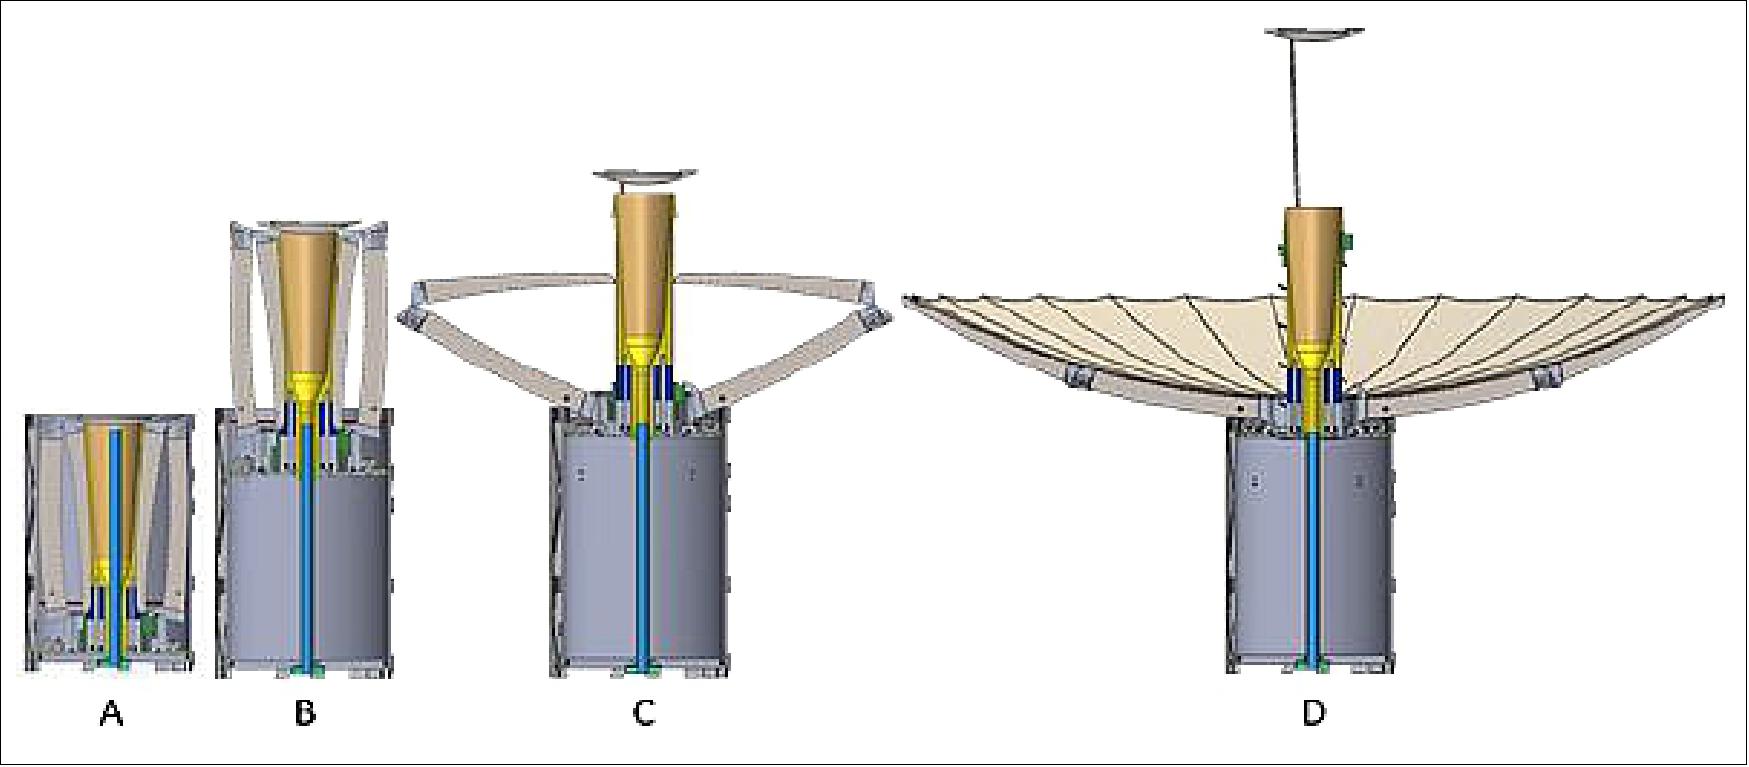 Figure 4: The deployment sequence unfurls the 0.5m antenna from a 0.1m diameter cylinder (image credit: NASA/JPL RainCube Team)